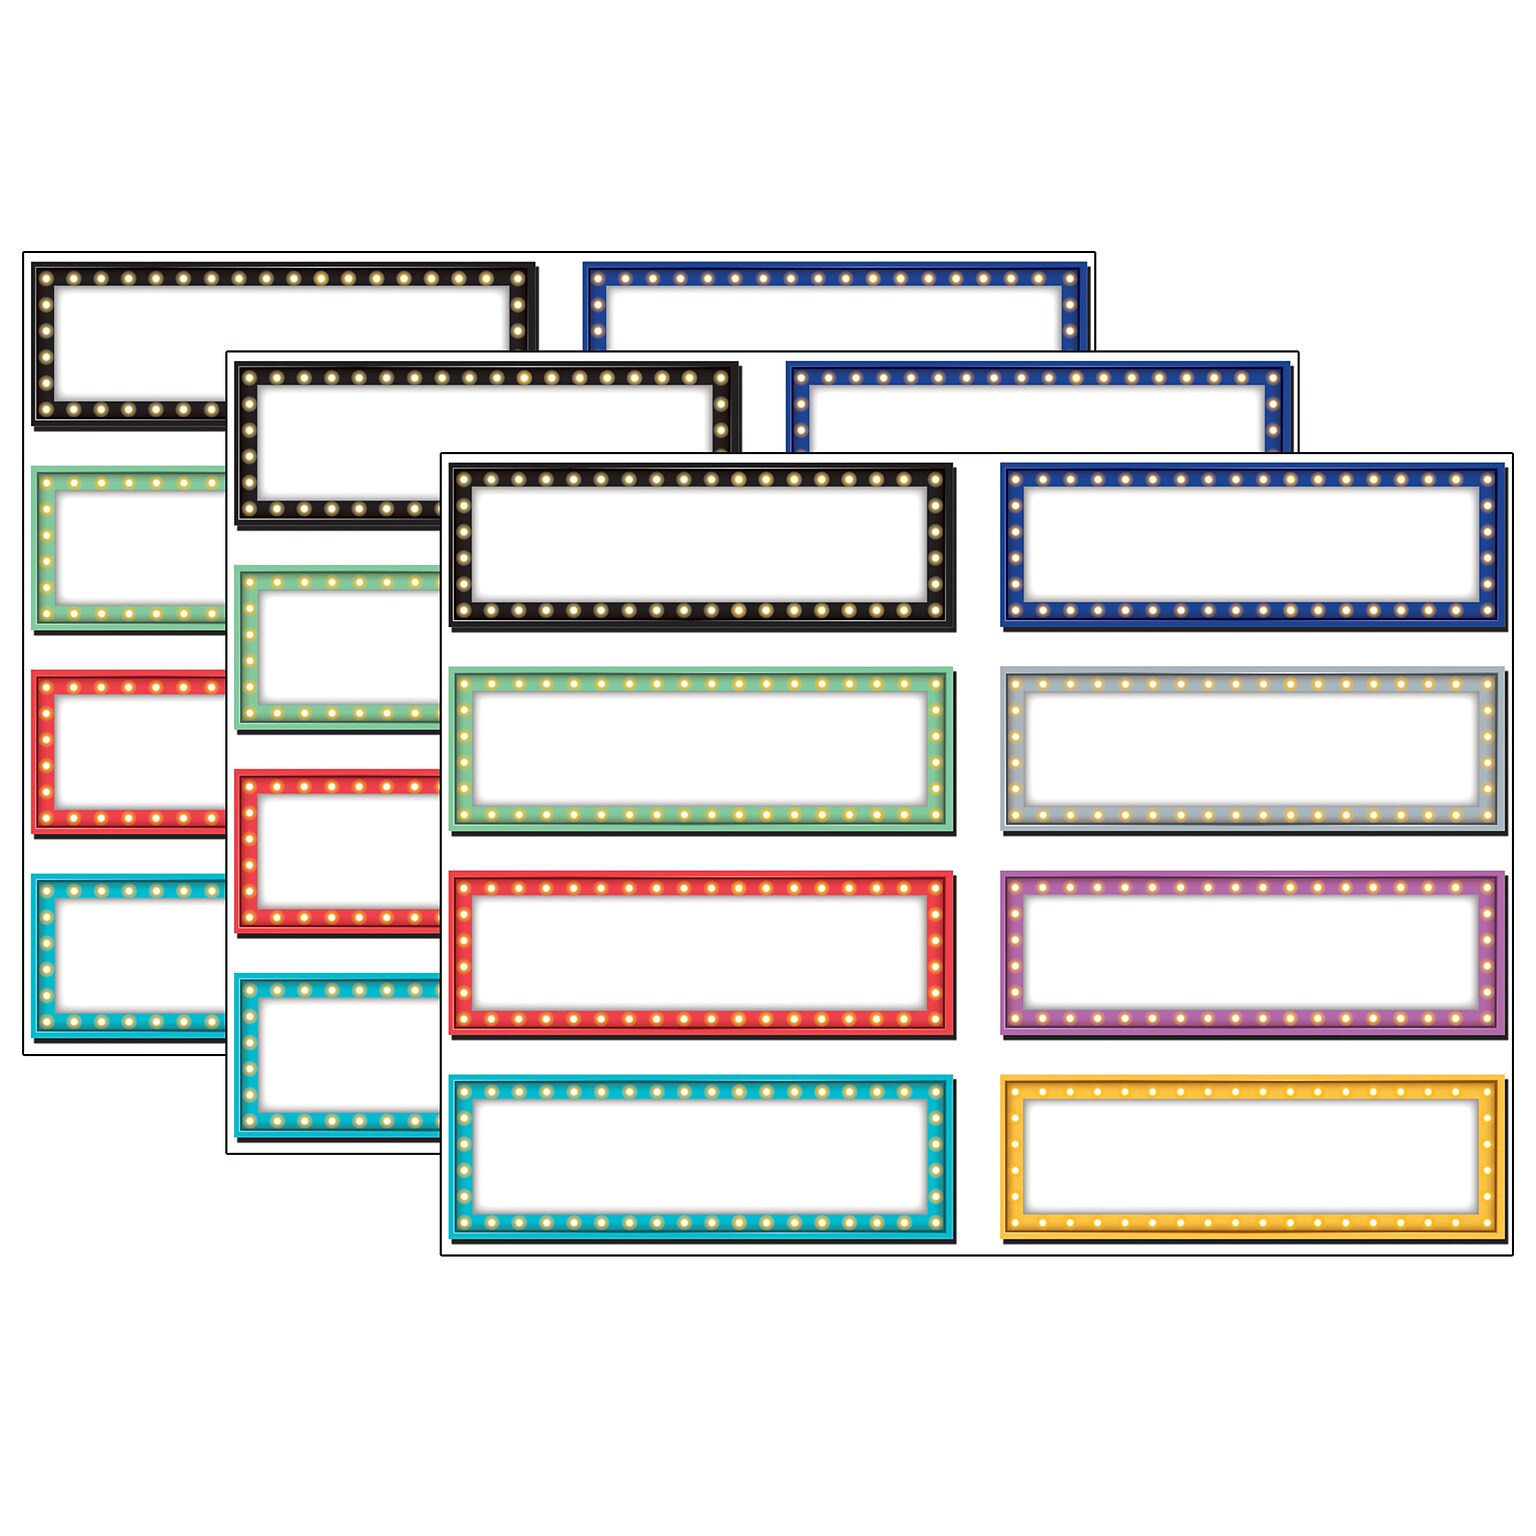 Teacher Created Resources Marquee Labels Magnetic Accents, 20 Per Pack, 3 Packs (TCR77284-3)